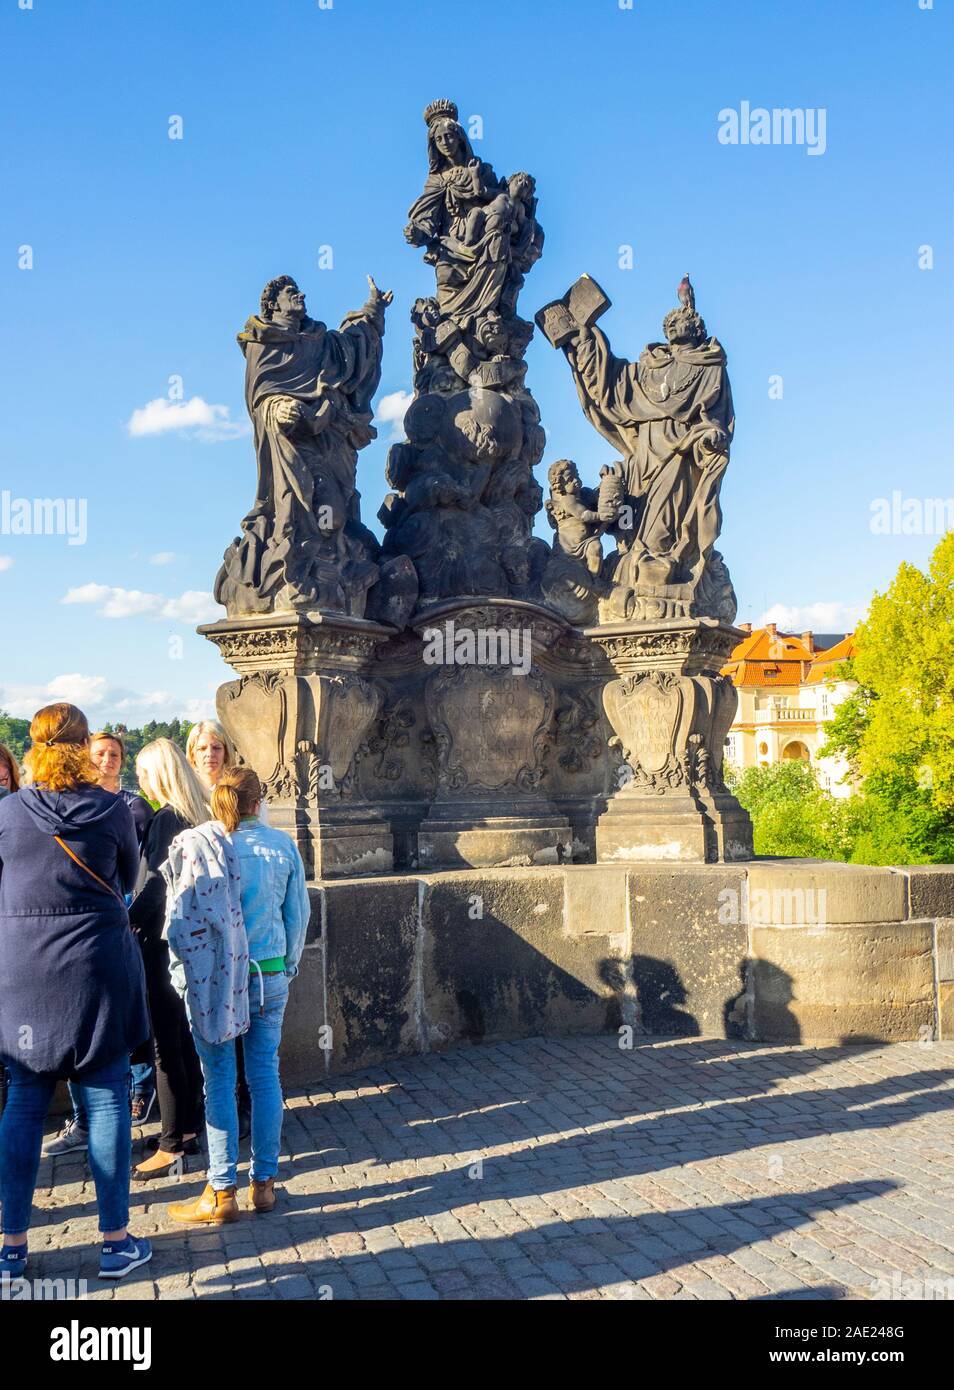 Tourists standing by replica statues of Madonna, Saint Dominic and Thomas Aquinas on the Charles Bridge Prague Czech Republic. Stock Photo